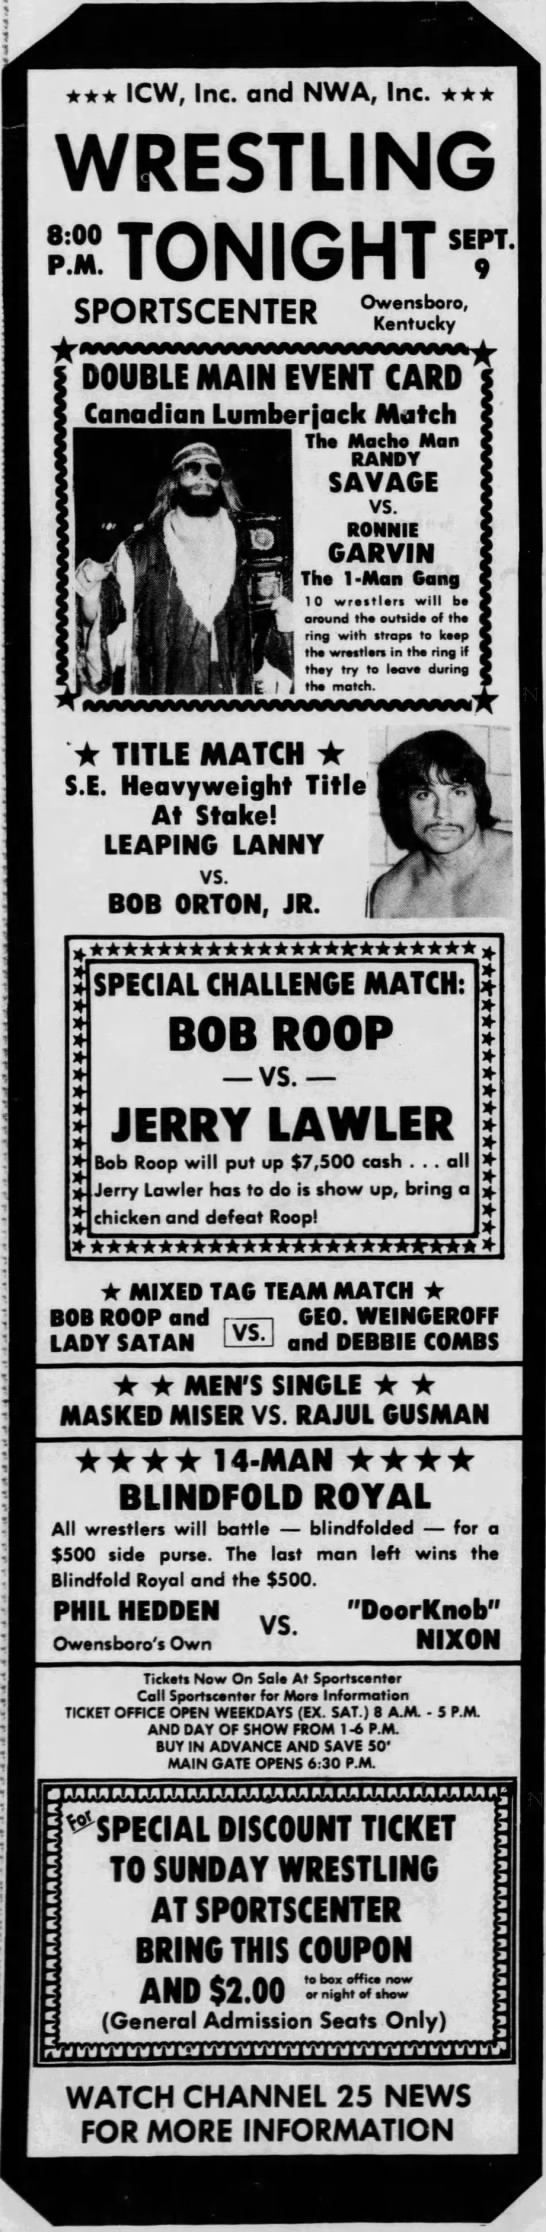 ICW "WRESTLING TONIGHT" ad with Lawler "challenge match" (Owensboro Messenger-Inquirer 9/9/1979) - 